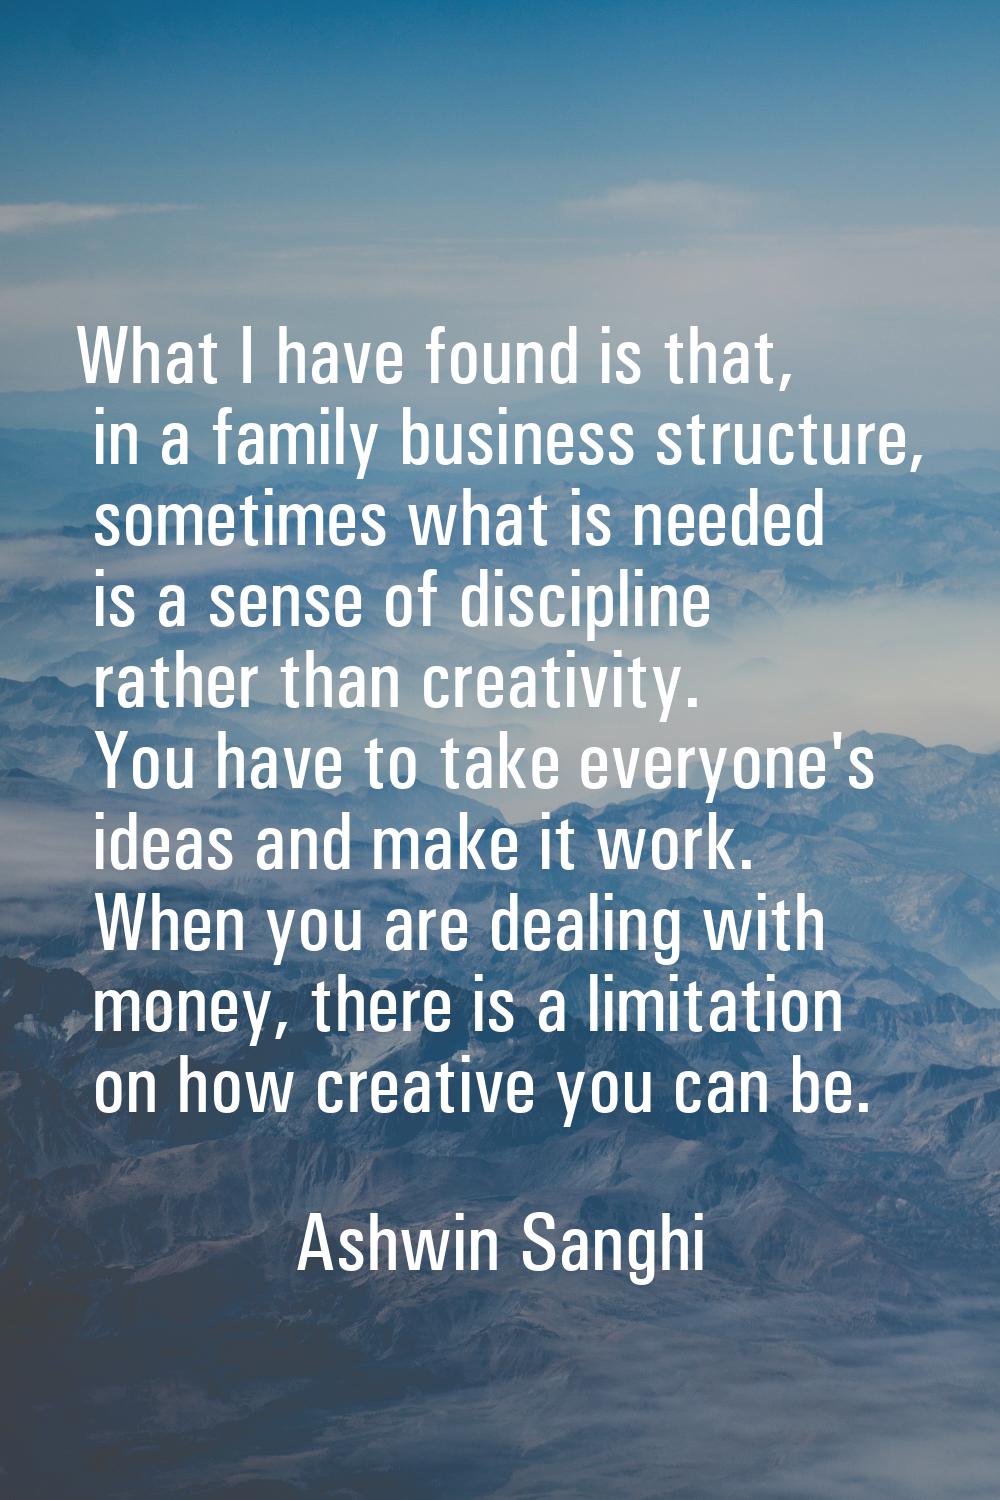 What I have found is that, in a family business structure, sometimes what is needed is a sense of d